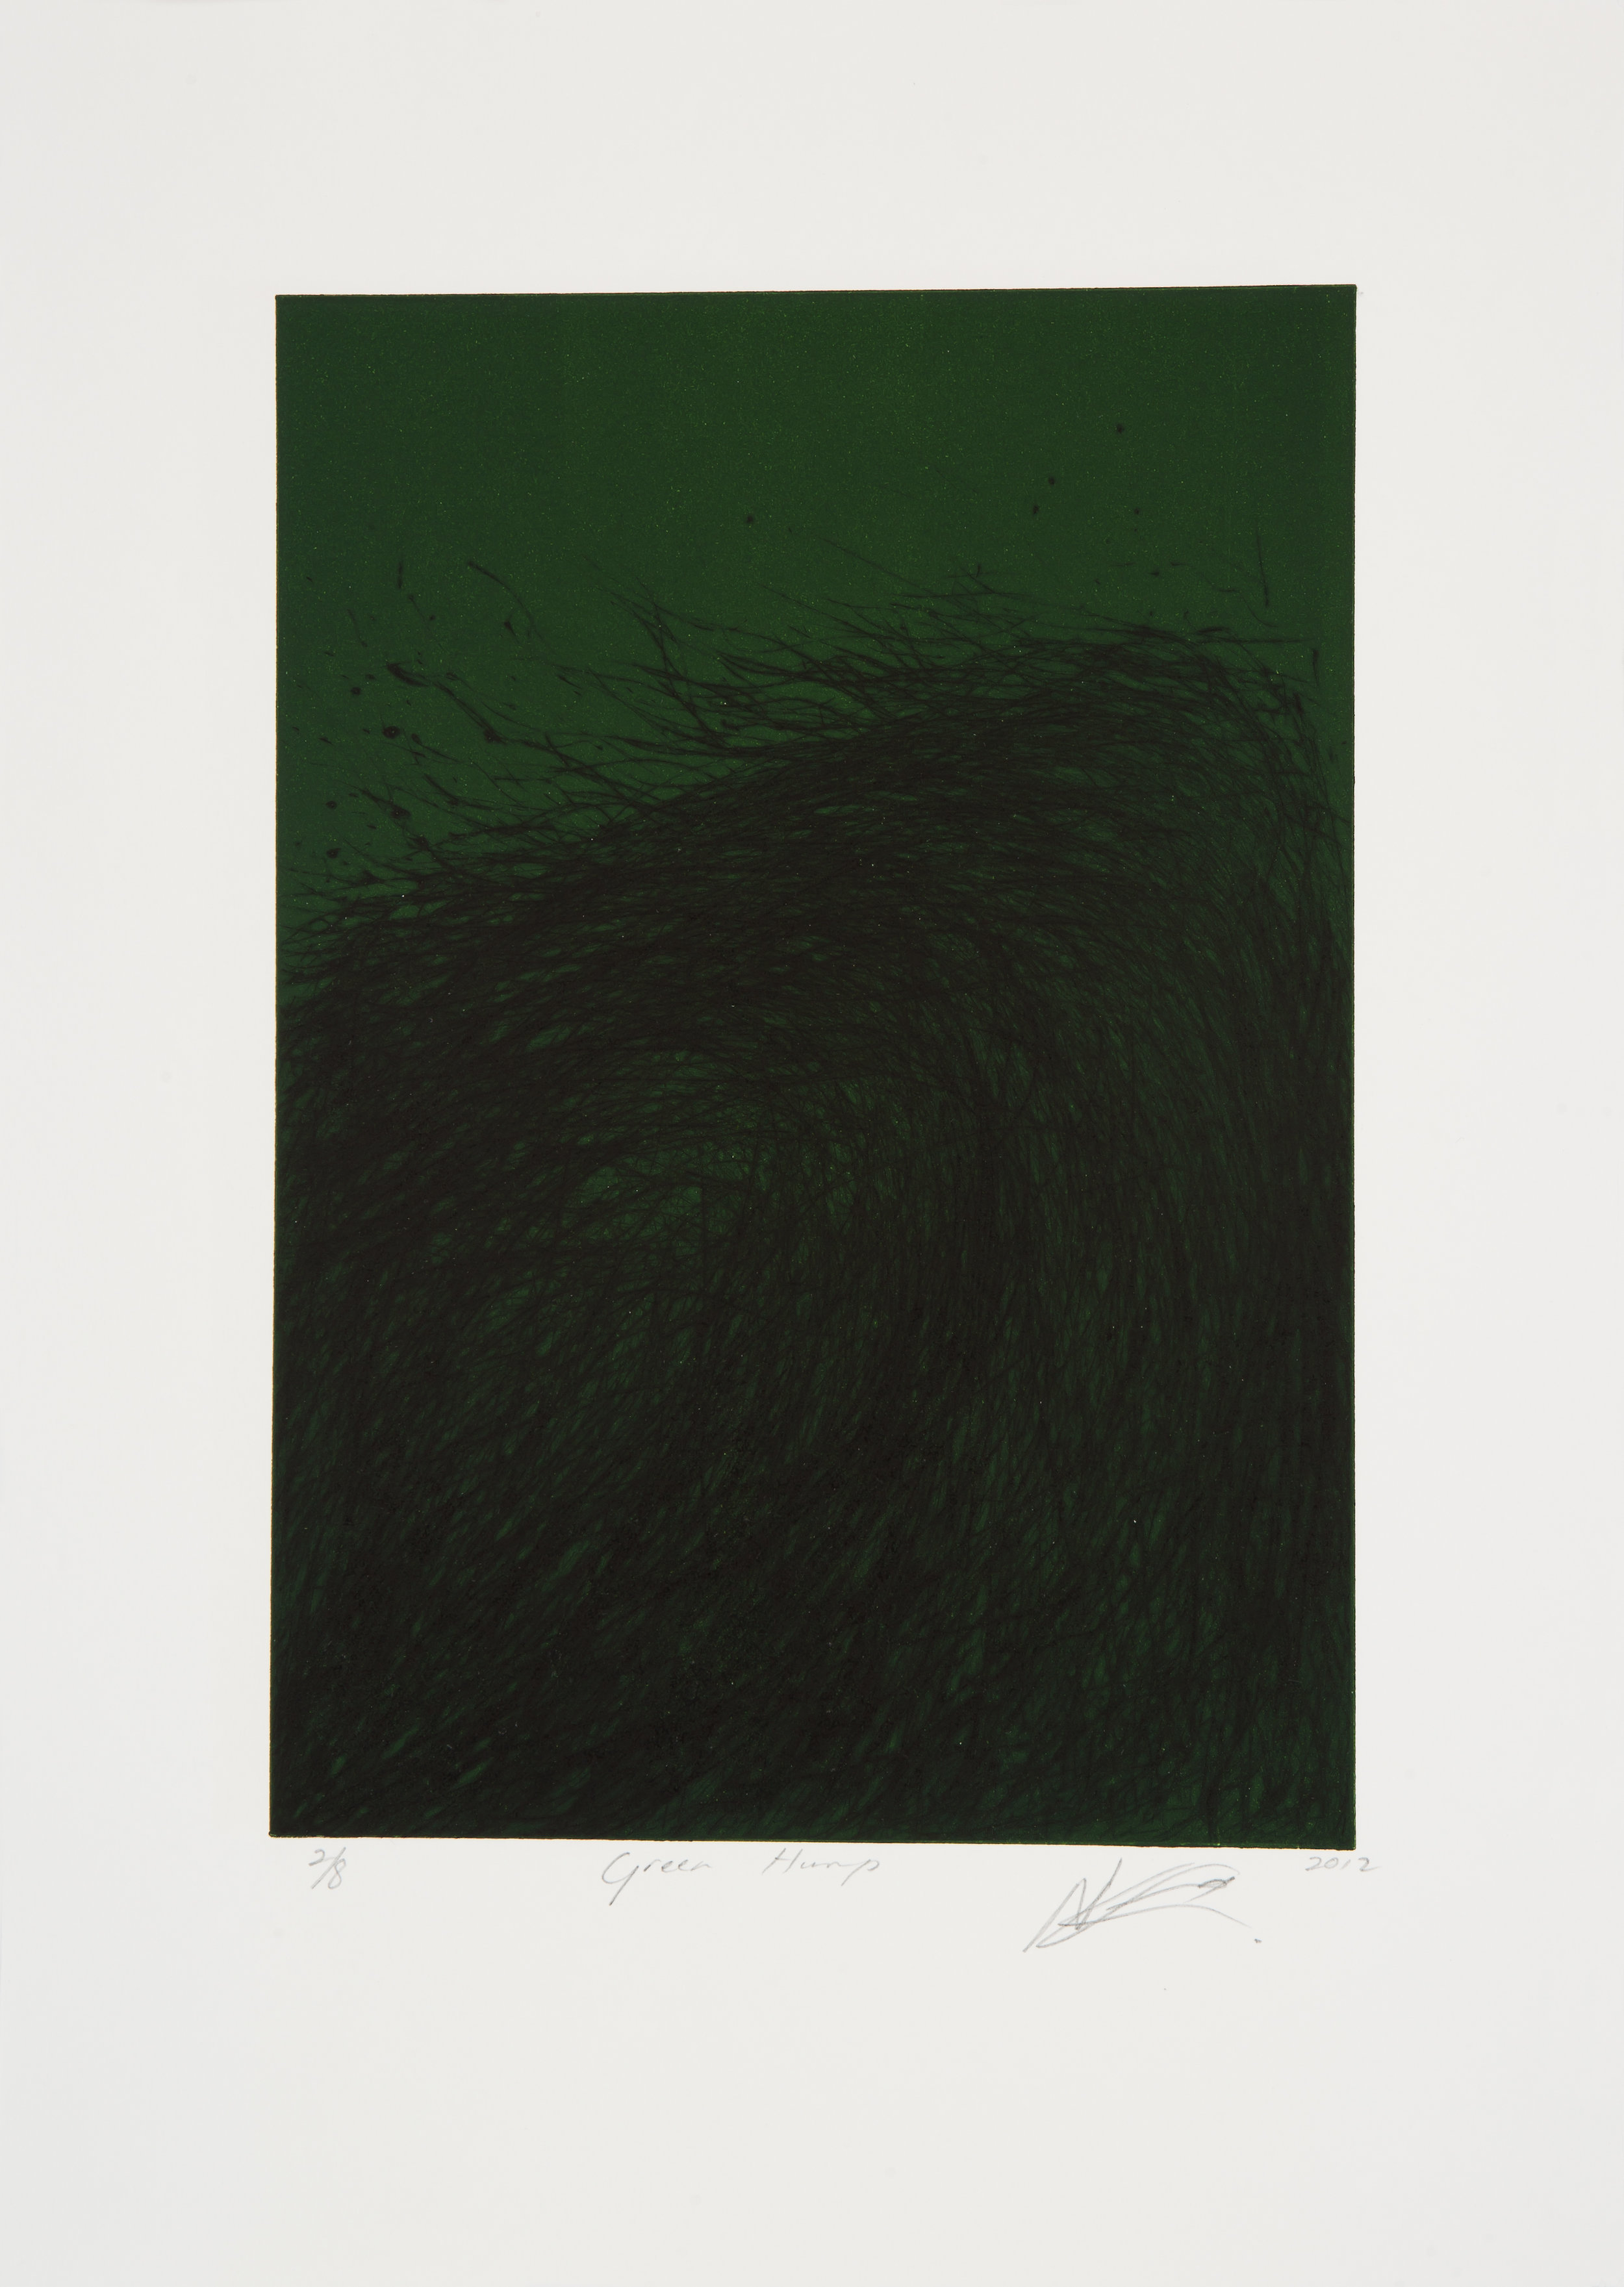   NANDIPHA MNTAMBO     Green Hump, 2012    Dry Point Etching (Edition of 8)  43cm x 31 cm 